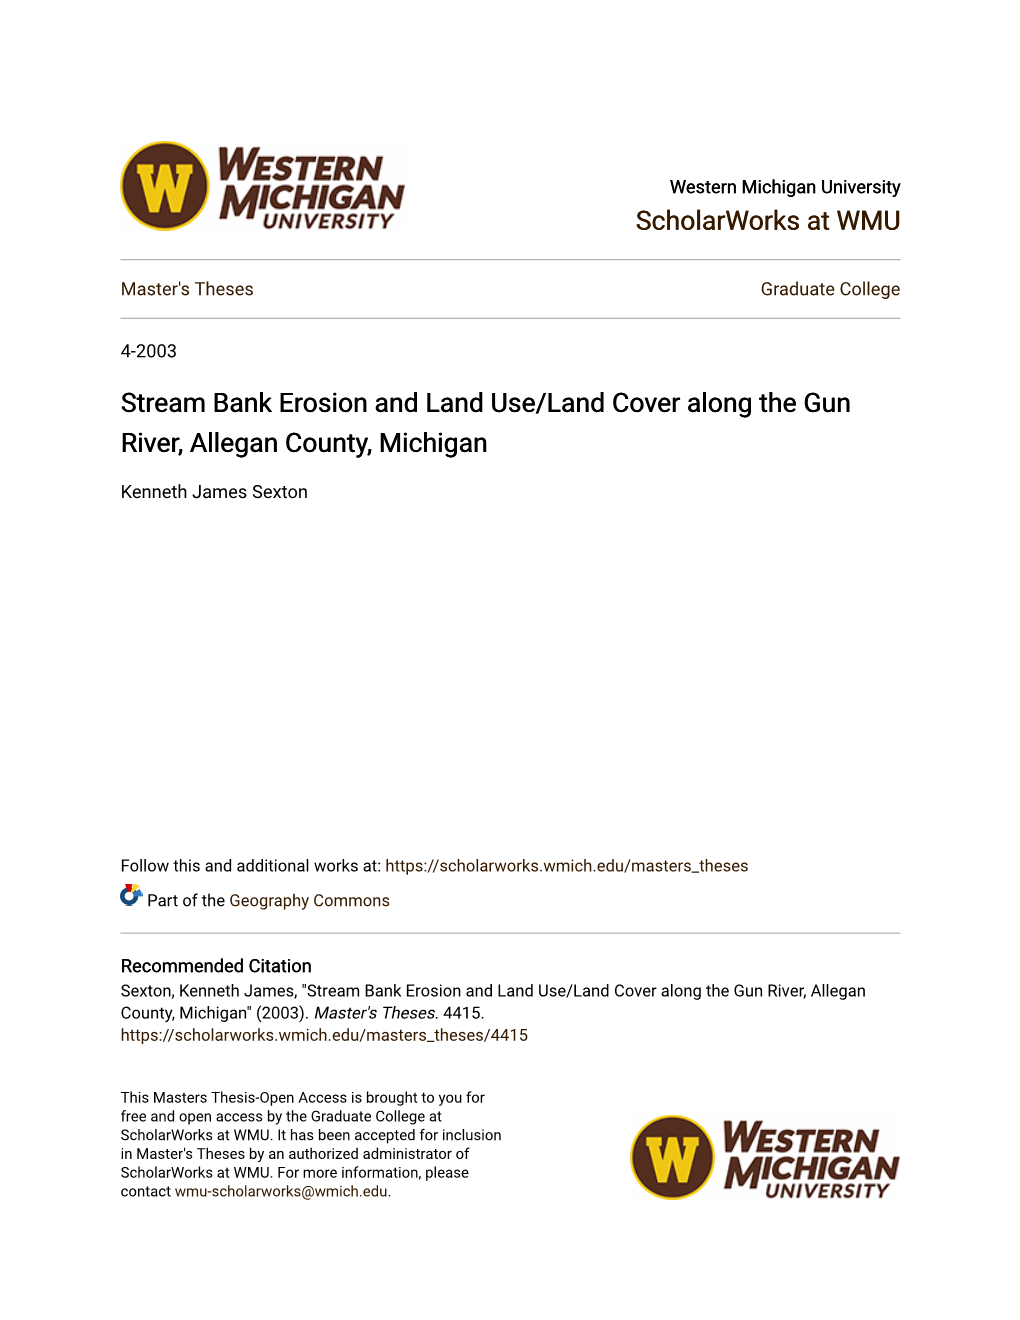 Stream Bank Erosion and Land Use/Land Cover Along the Gun River, Allegan County, Michigan